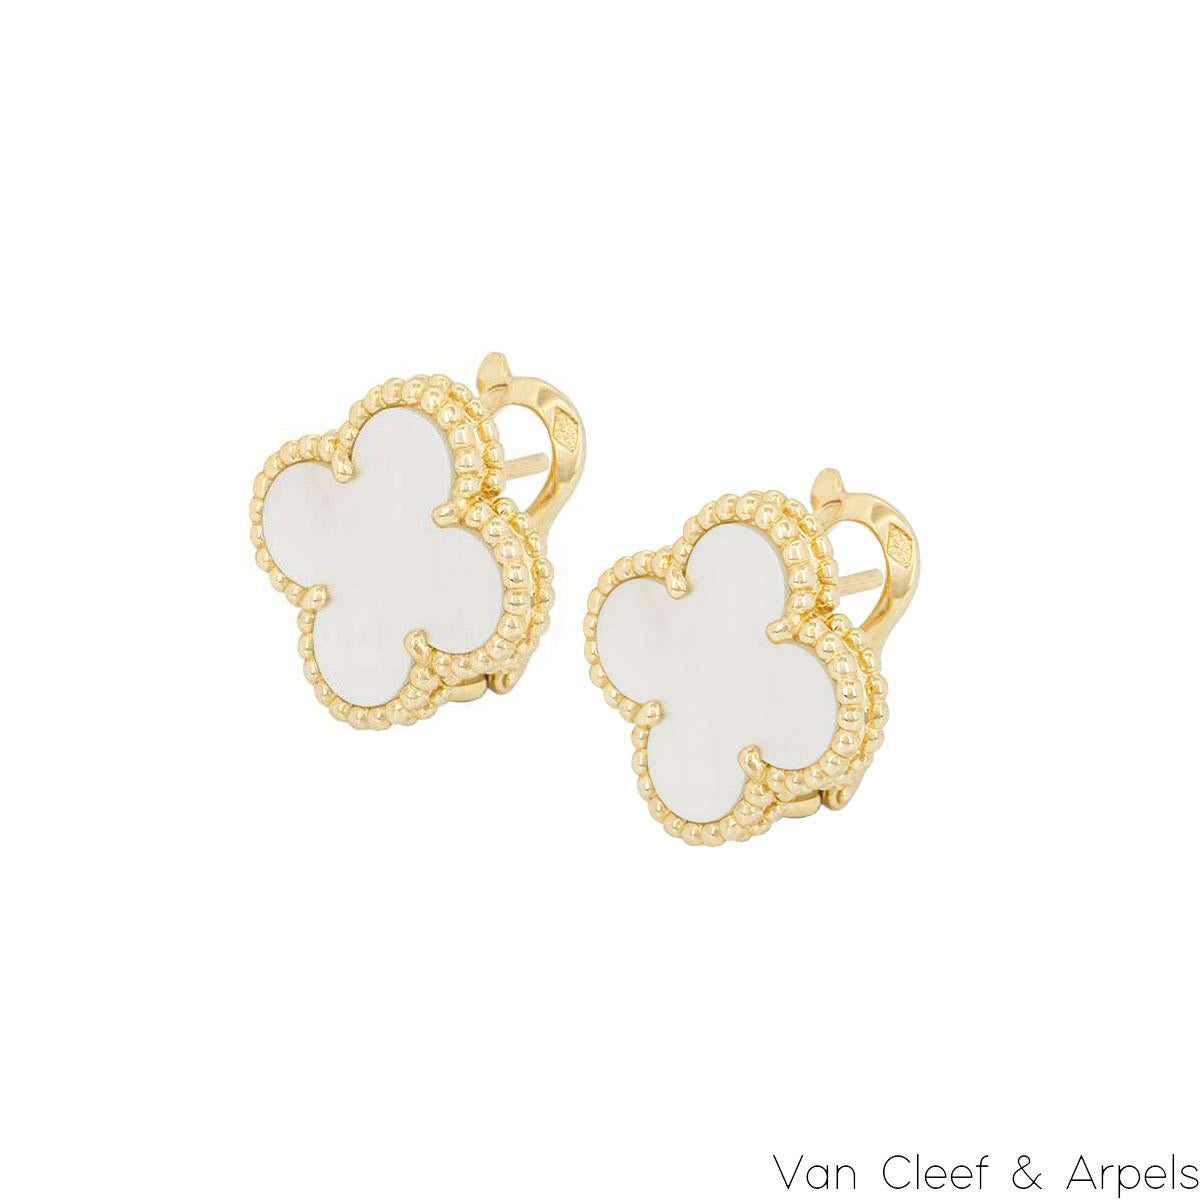 A beautiful pair of 18k yellow gold mother of pearl Van Cleef & Arpels earrings from the Vintage Alhambra collection. The earrings feature the iconic 4-leaf clover motif, with a mother of pearl inlay set to the centre, complemented by a beaded edge.